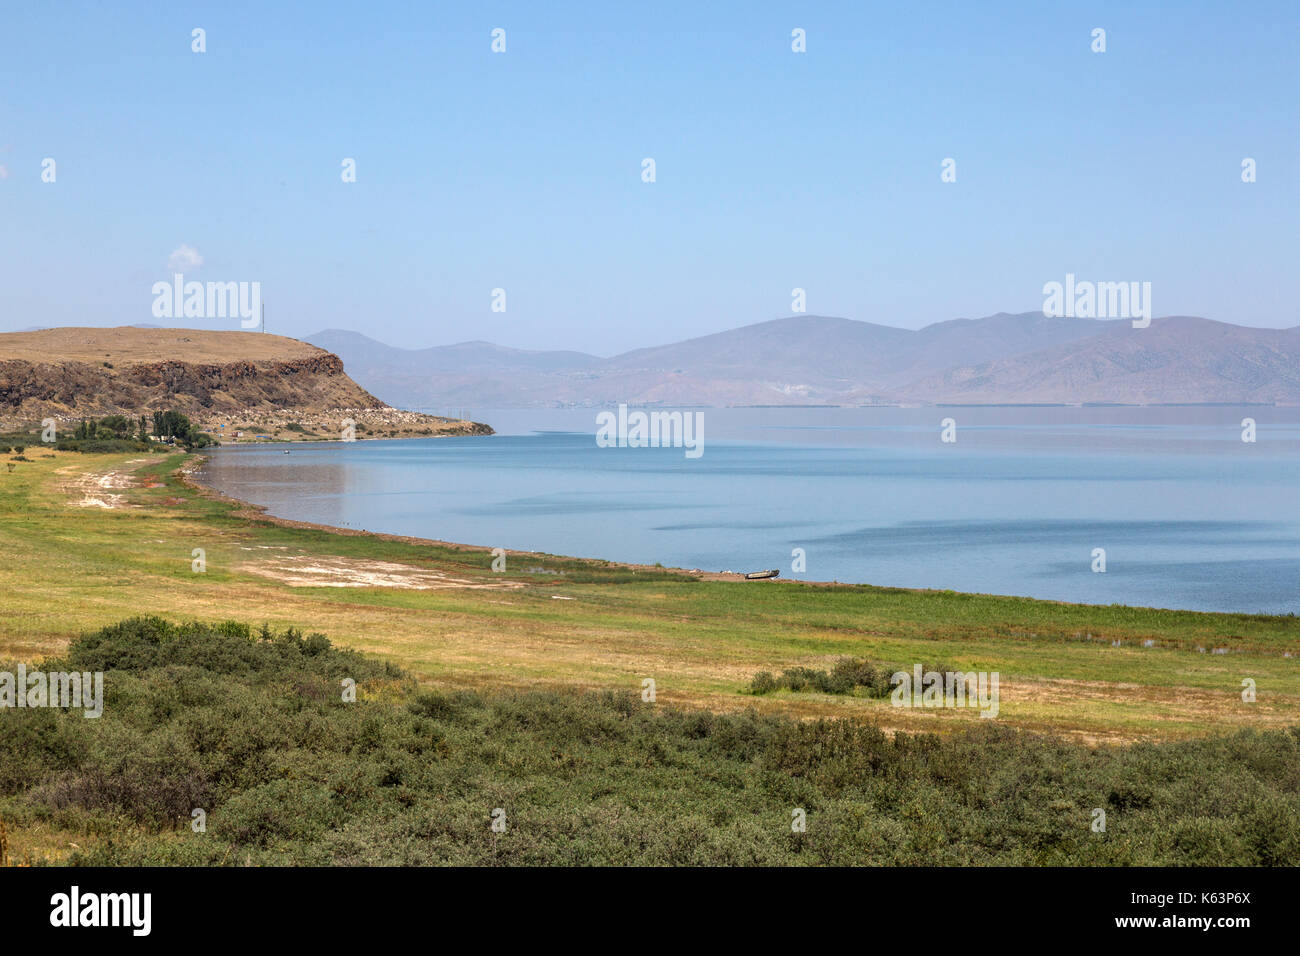 Shores of Lake Sevan in Armenia.The lake is situated in Gegharkunik Province, at an altitude of 1,900 m (6,234 ft) above sea level. Stock Photo